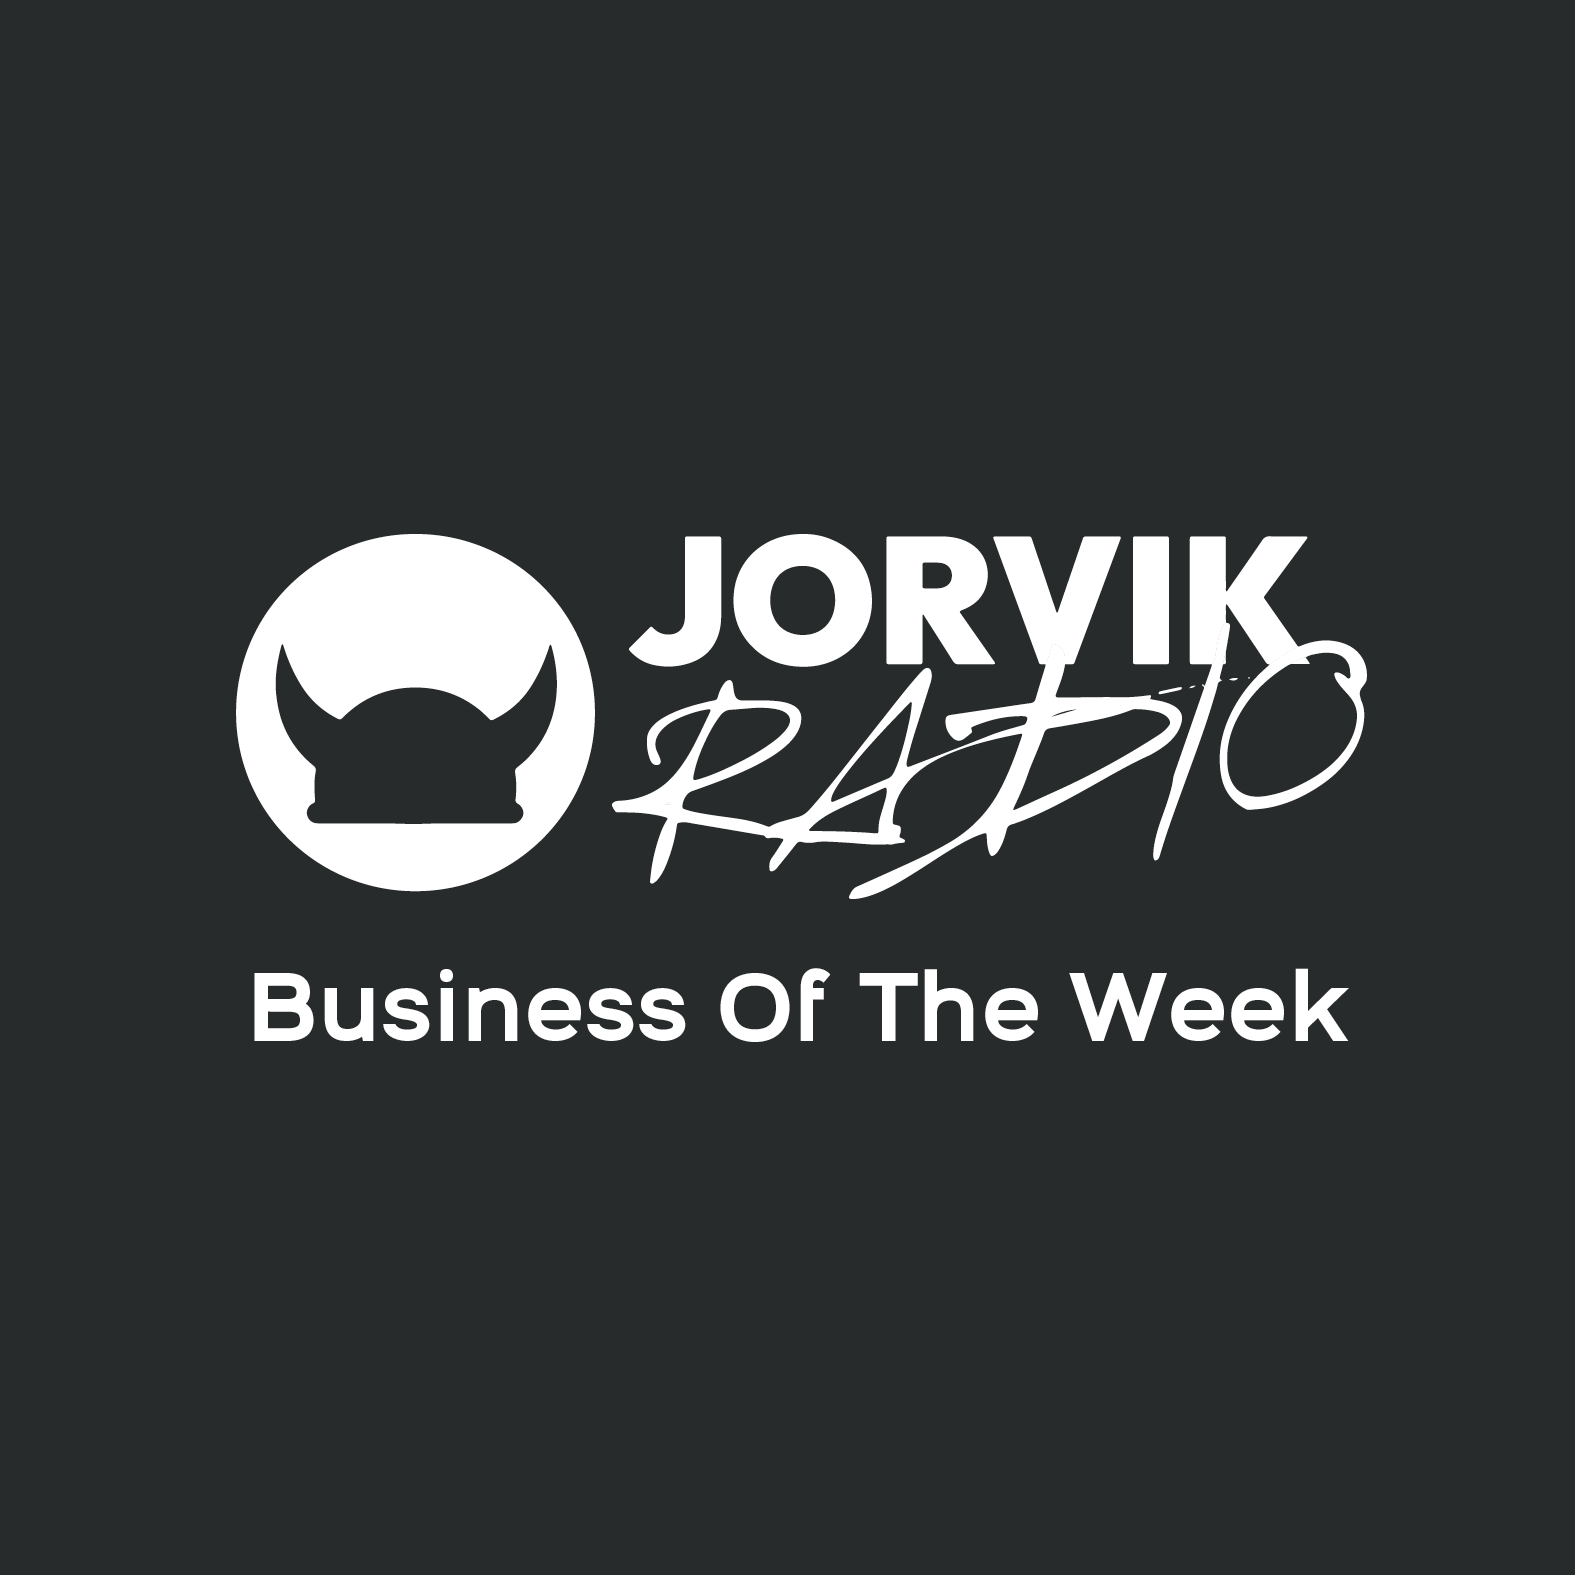 Business Of The Week